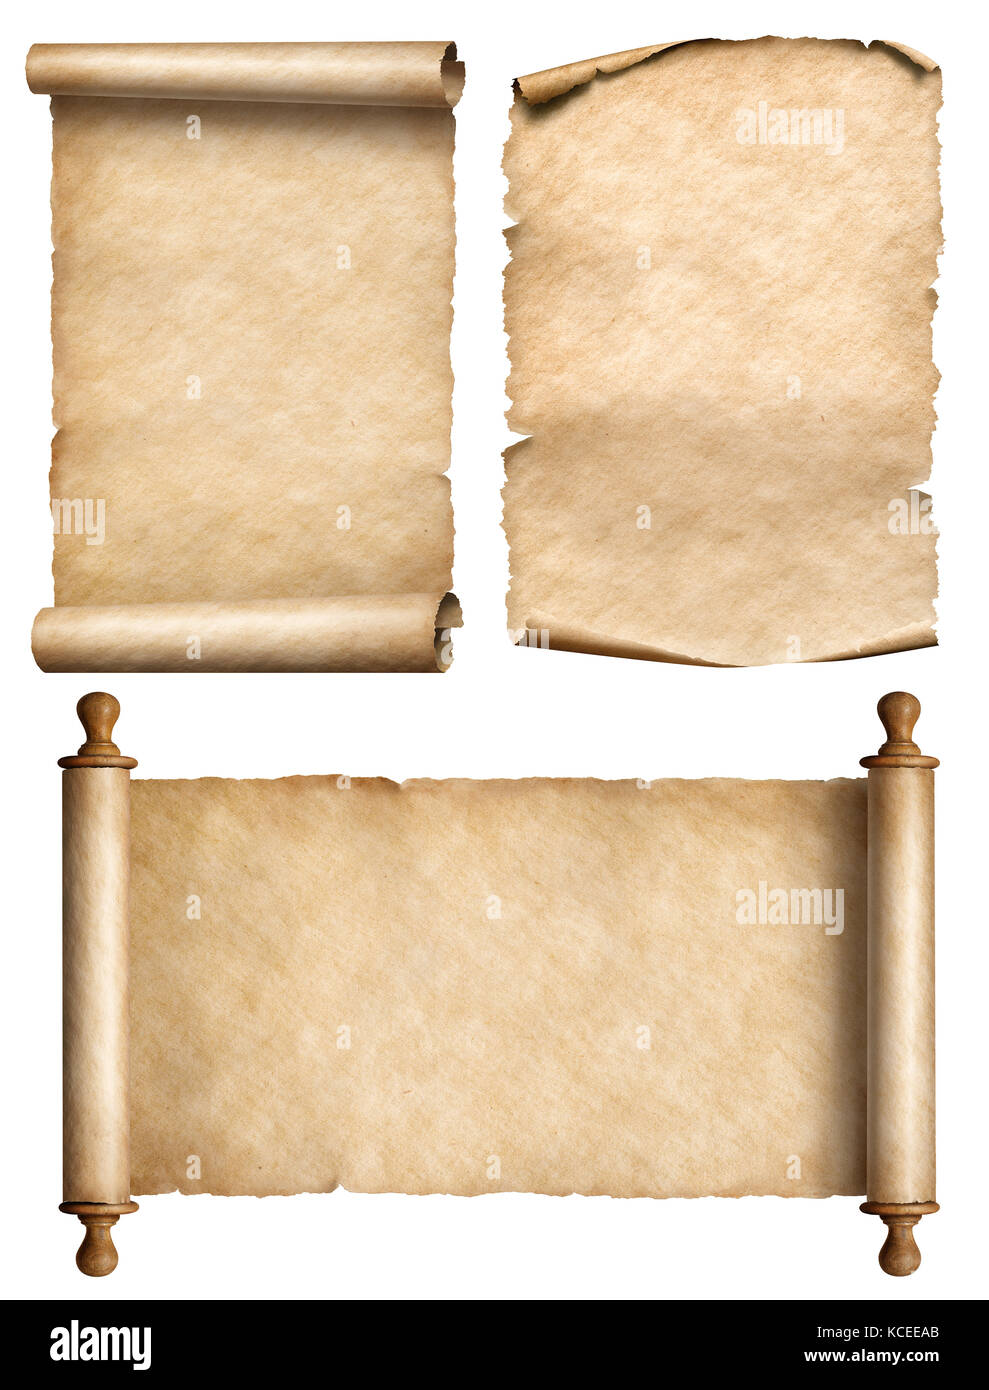 Free Vector  Vertical vintage paper roll or parchment scroll ancient  papyrus